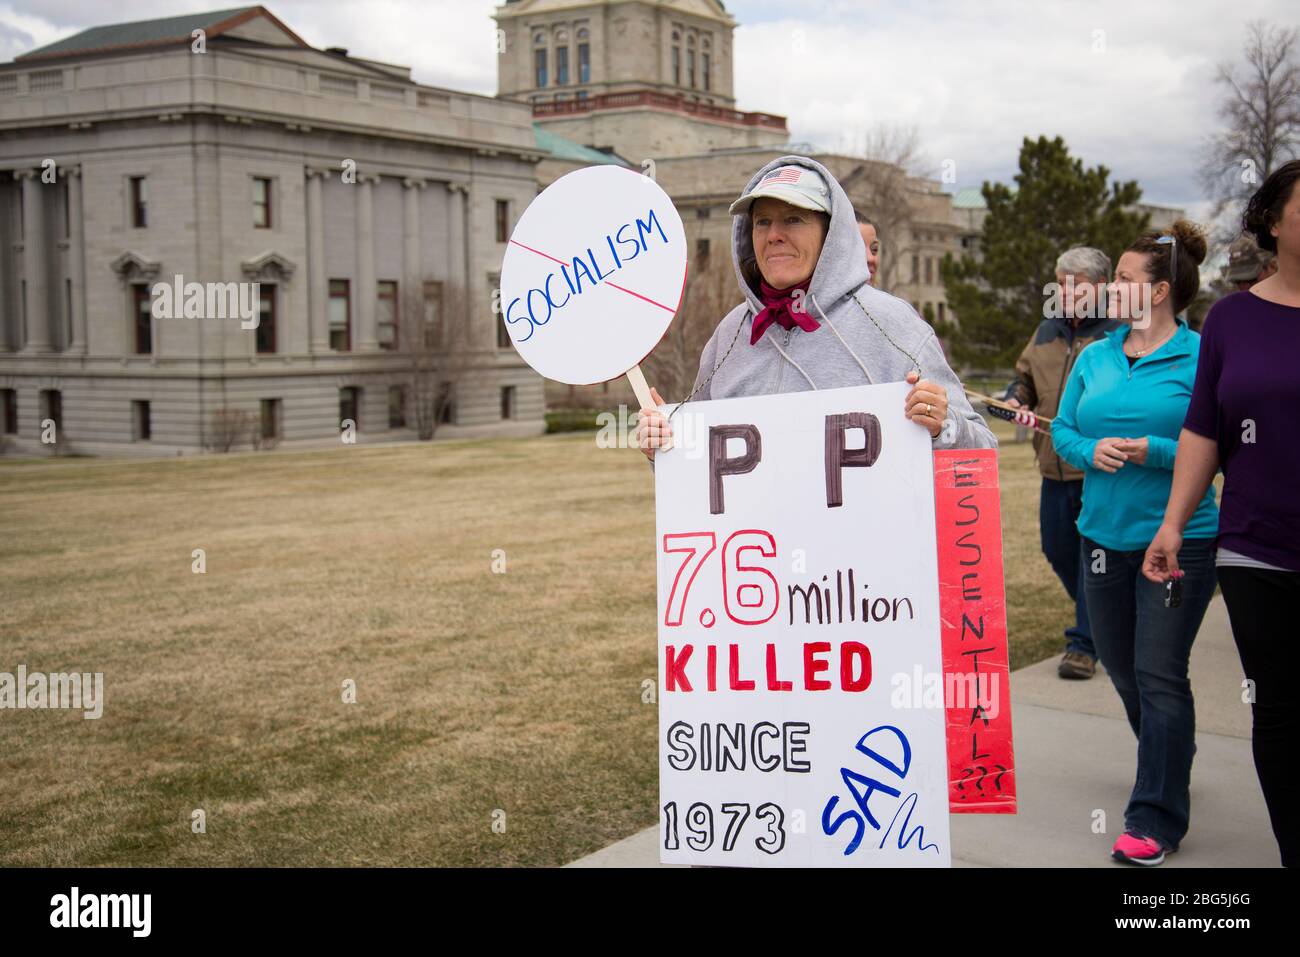 Helena, Montana - April 19, 2020: Protestor holding Planned Parenthood abortion deaths sign at a demonstration of the government shutdown of non essen Stock Photo